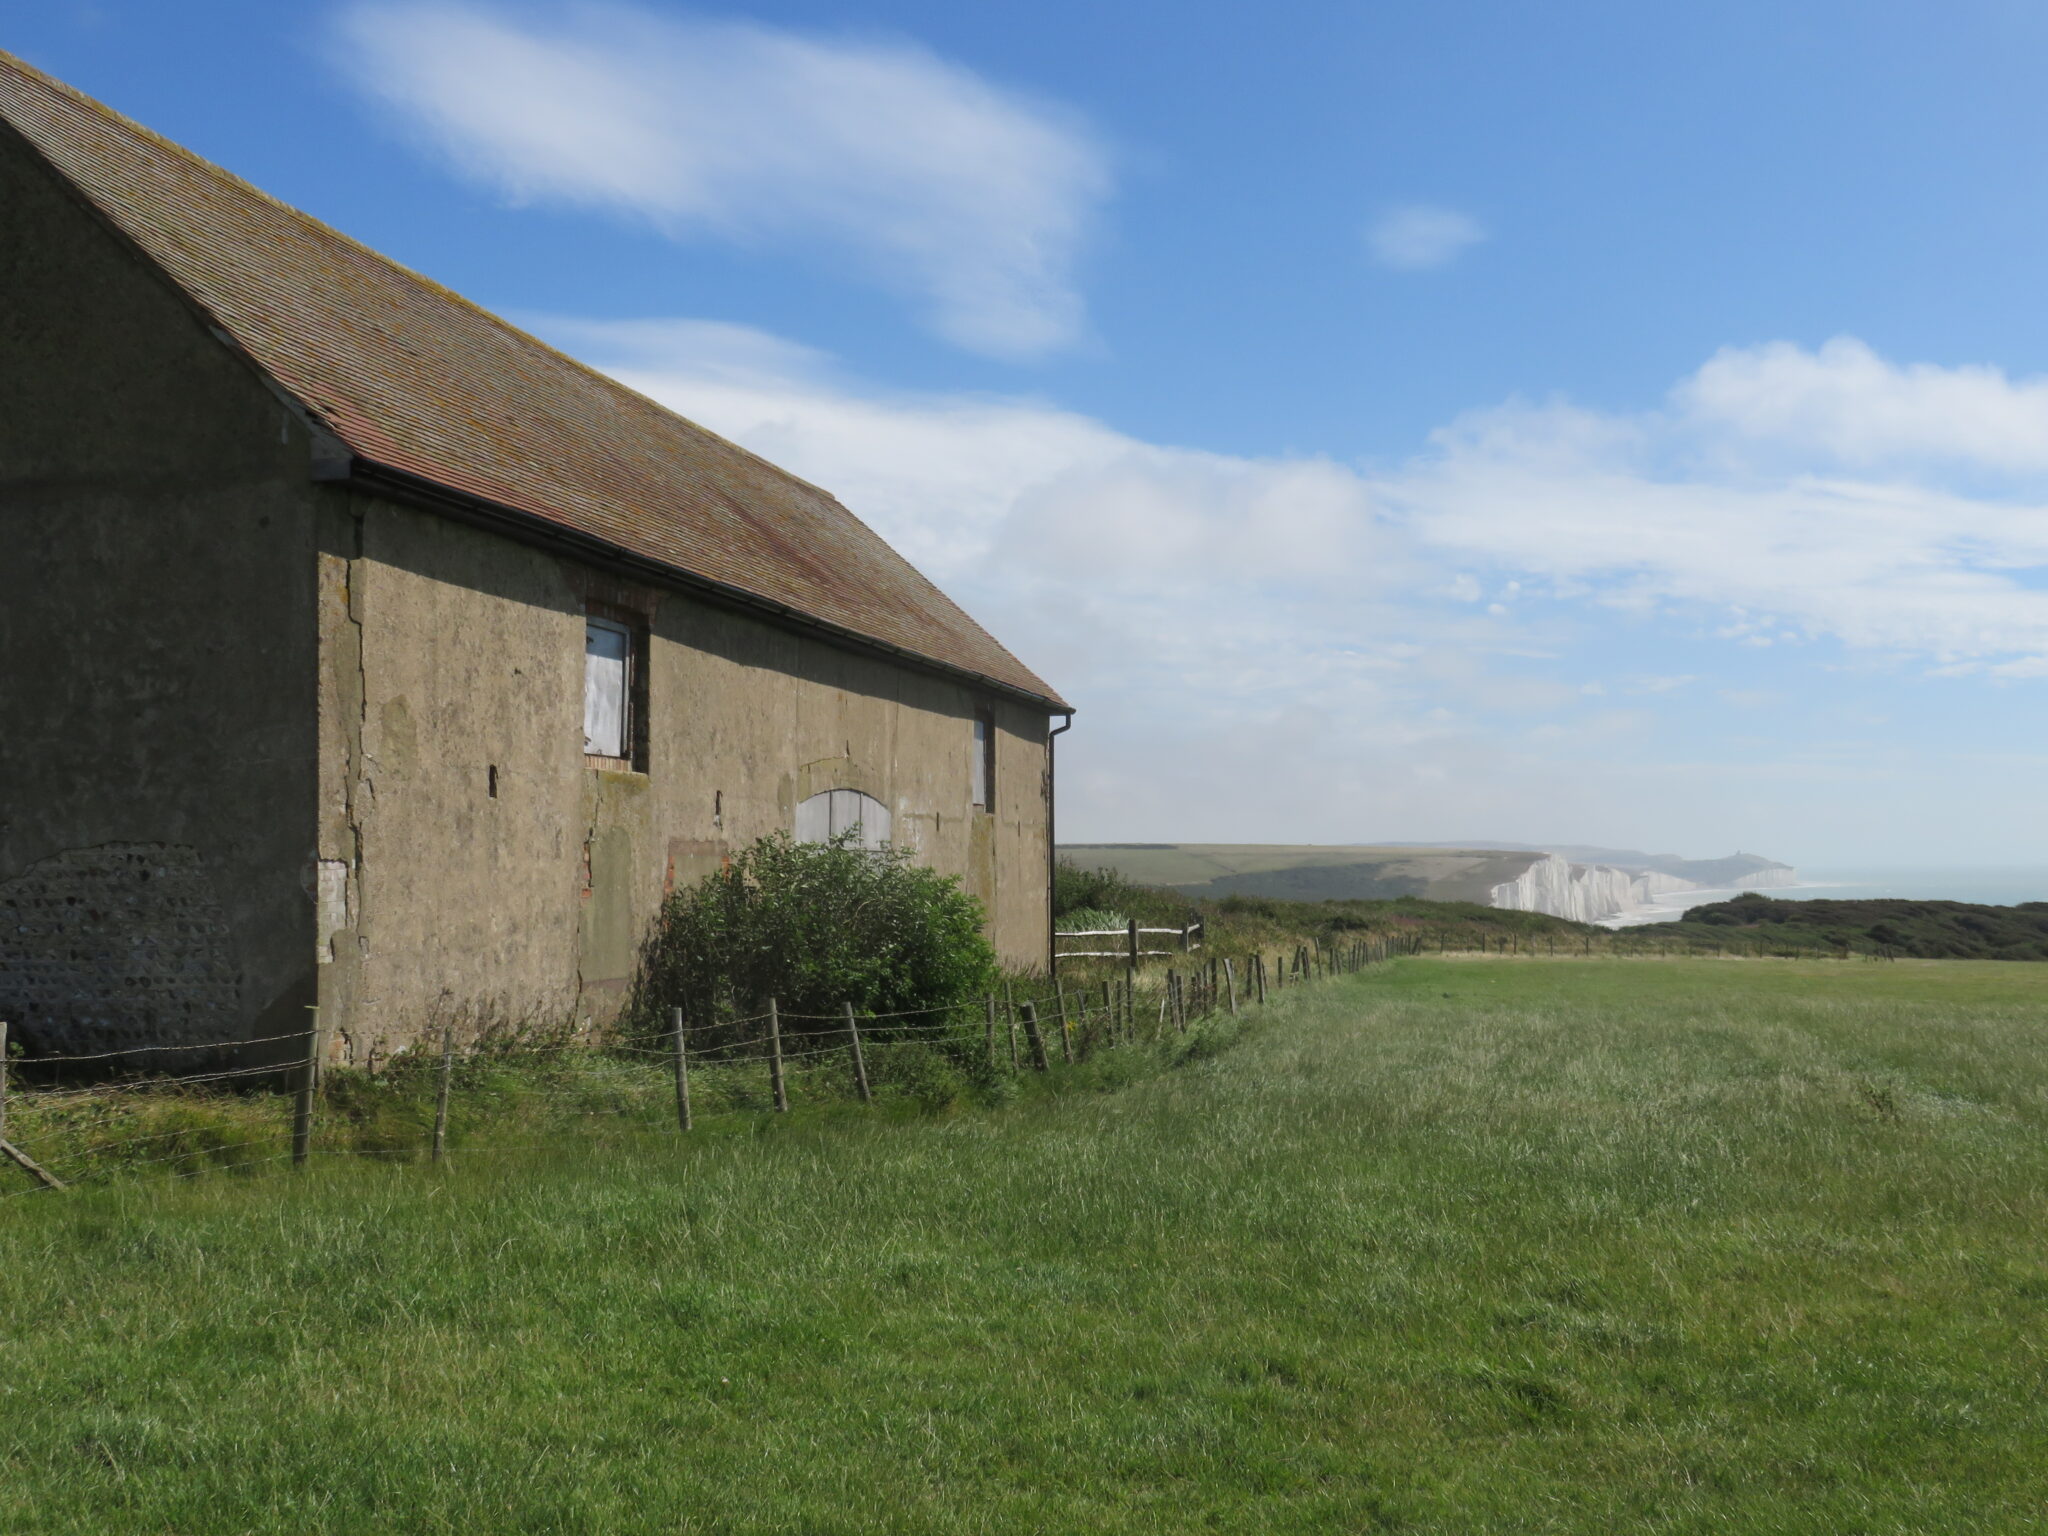 External view of South Hill Barn.